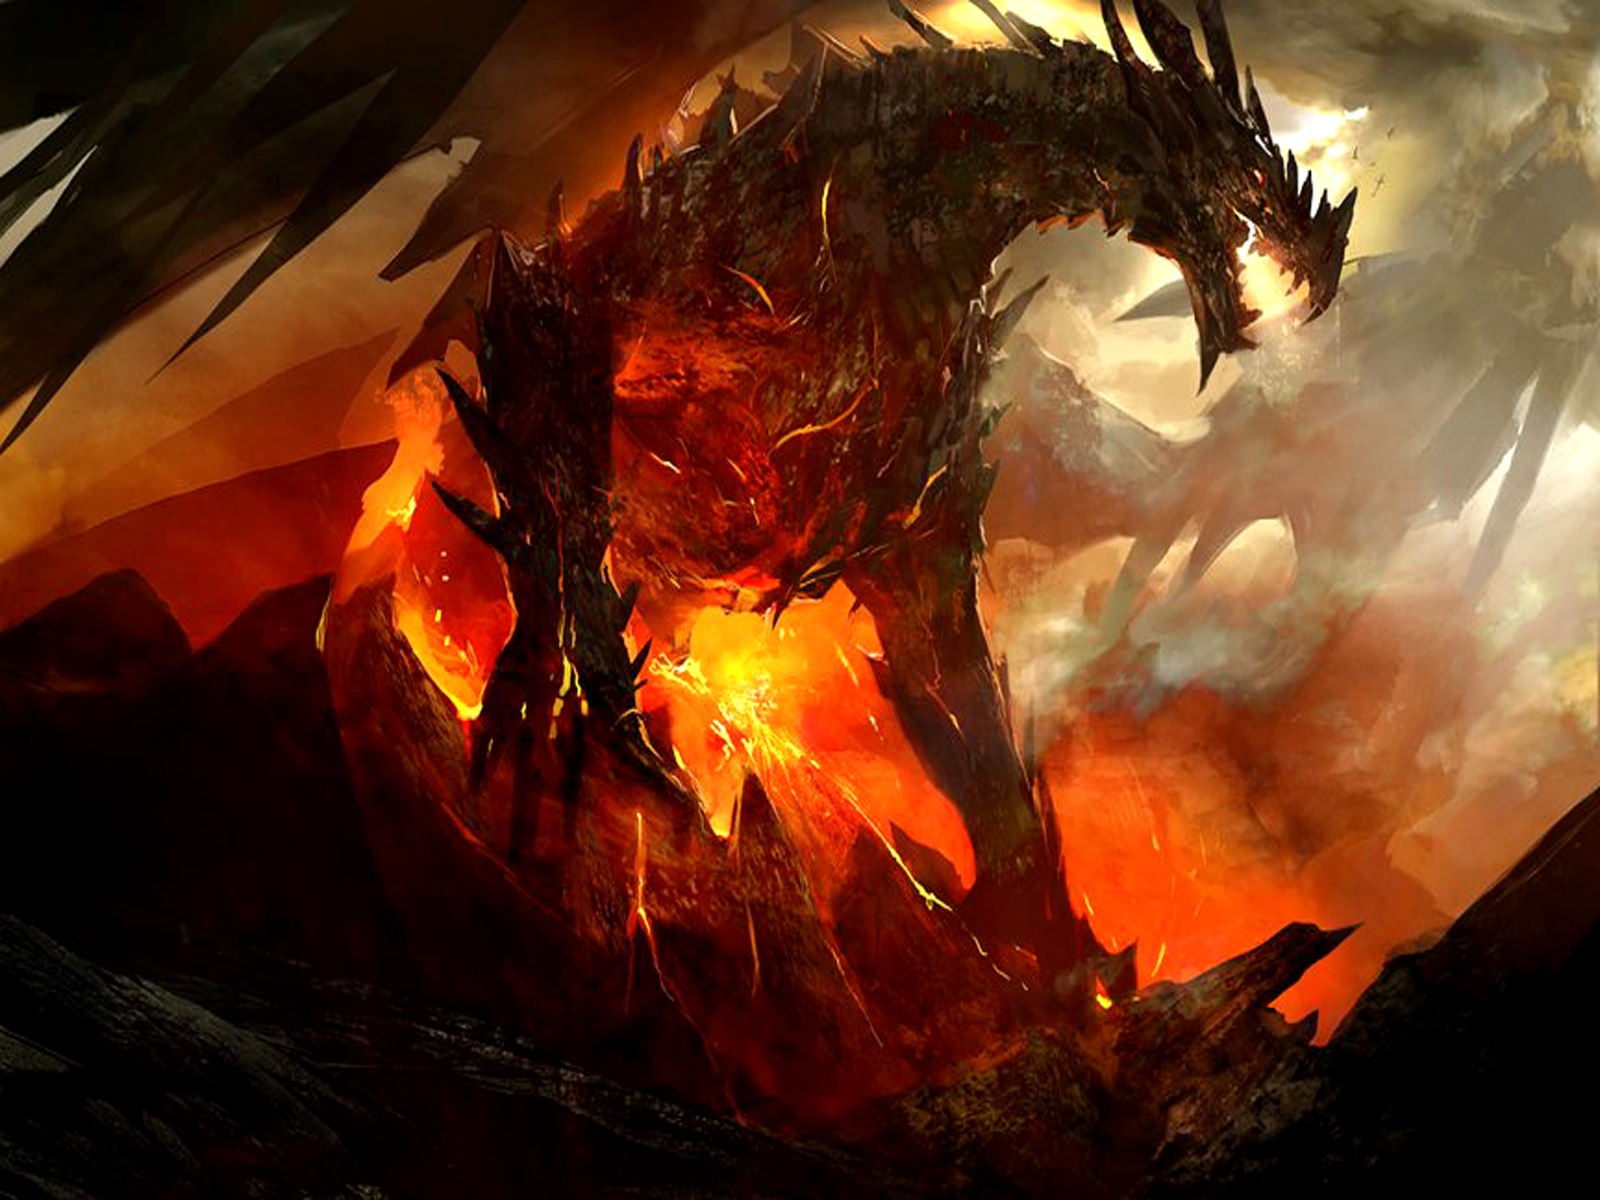 Dragon HD Wallpapers Dragon Pictures Cool Wallpapers 1600x1200